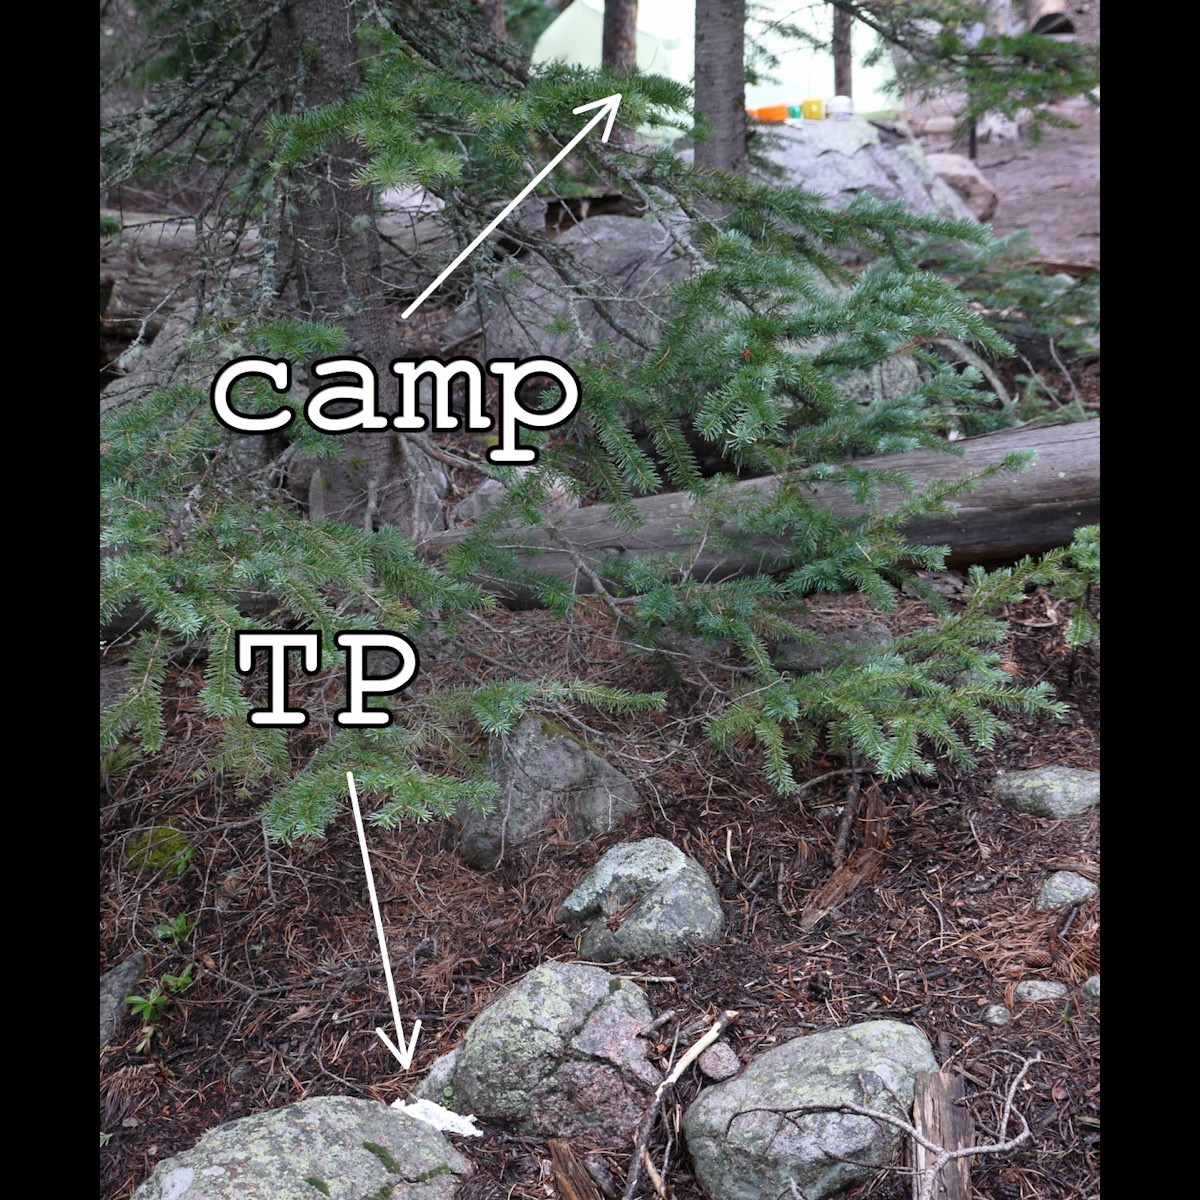 Not even 20 feet from camp...in Rocky Mountain national Park no less!  #HoleOfShame #CampCaCA